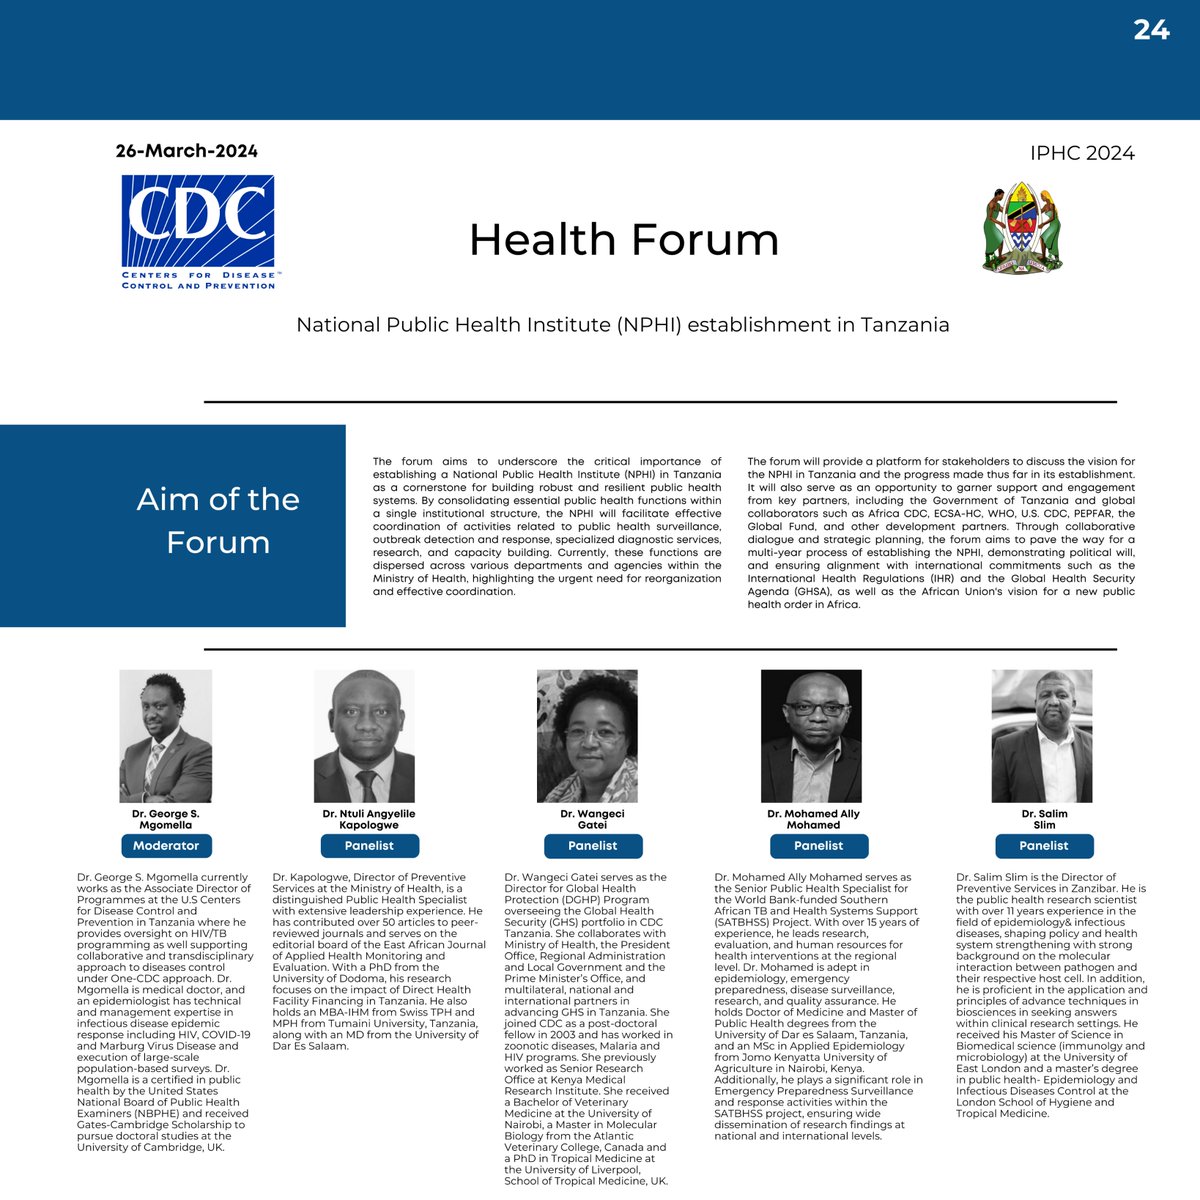 Happy to attend the 1st International Primary Healthcare Conference organized by @ortamisemitz. CDC in collaboration with @wizara_afyatz will host a forum on March 26, 2p.m. to discuss updates on the establishment of the National Public Health Institute in Tanzania. #KaribuniSana